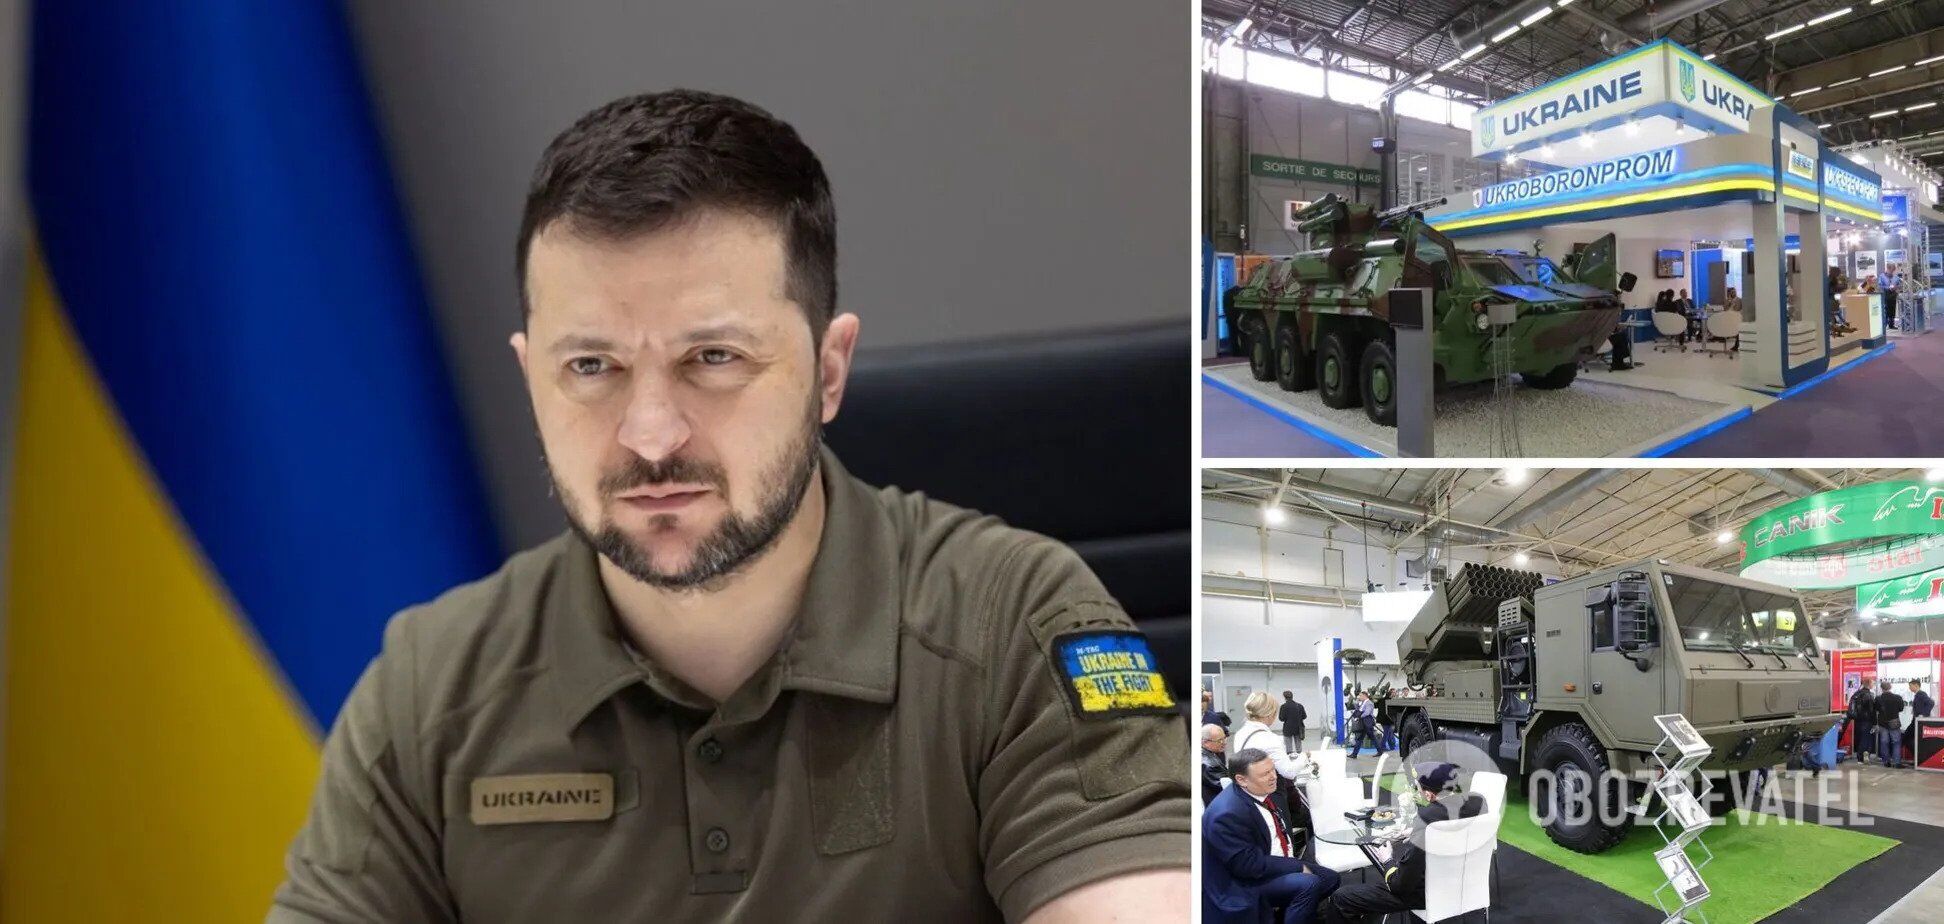 ''Arms manufacturers will have exceptional conditions'': A defense forum with the participation of companies from dozens of countries held in Kyiv. All details